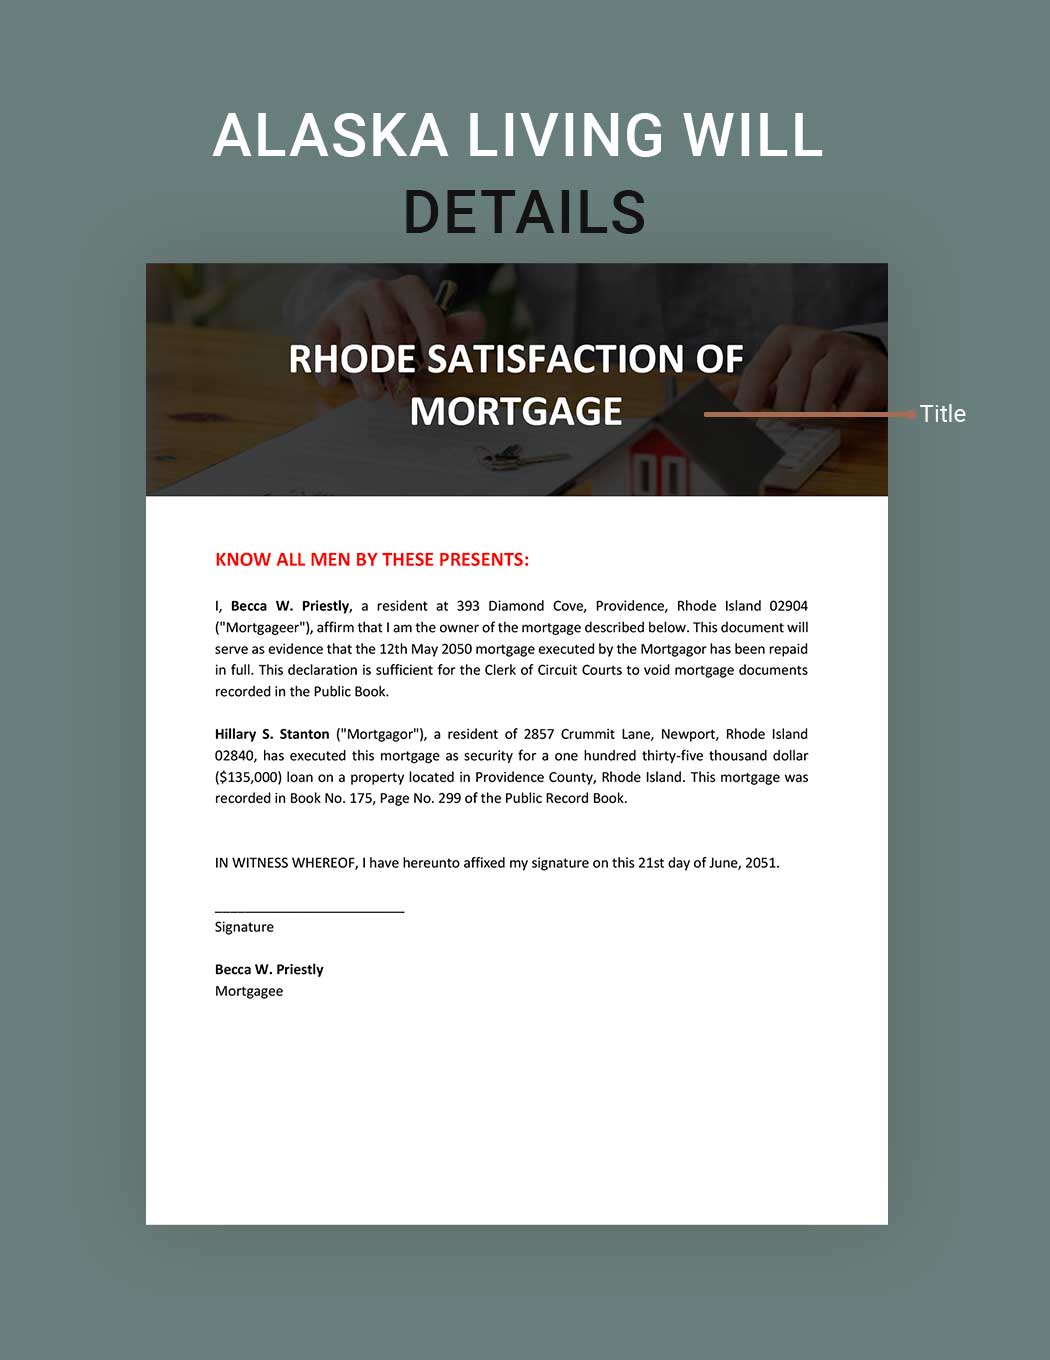 Rhode Island Satisfaction Of Mortgage Template